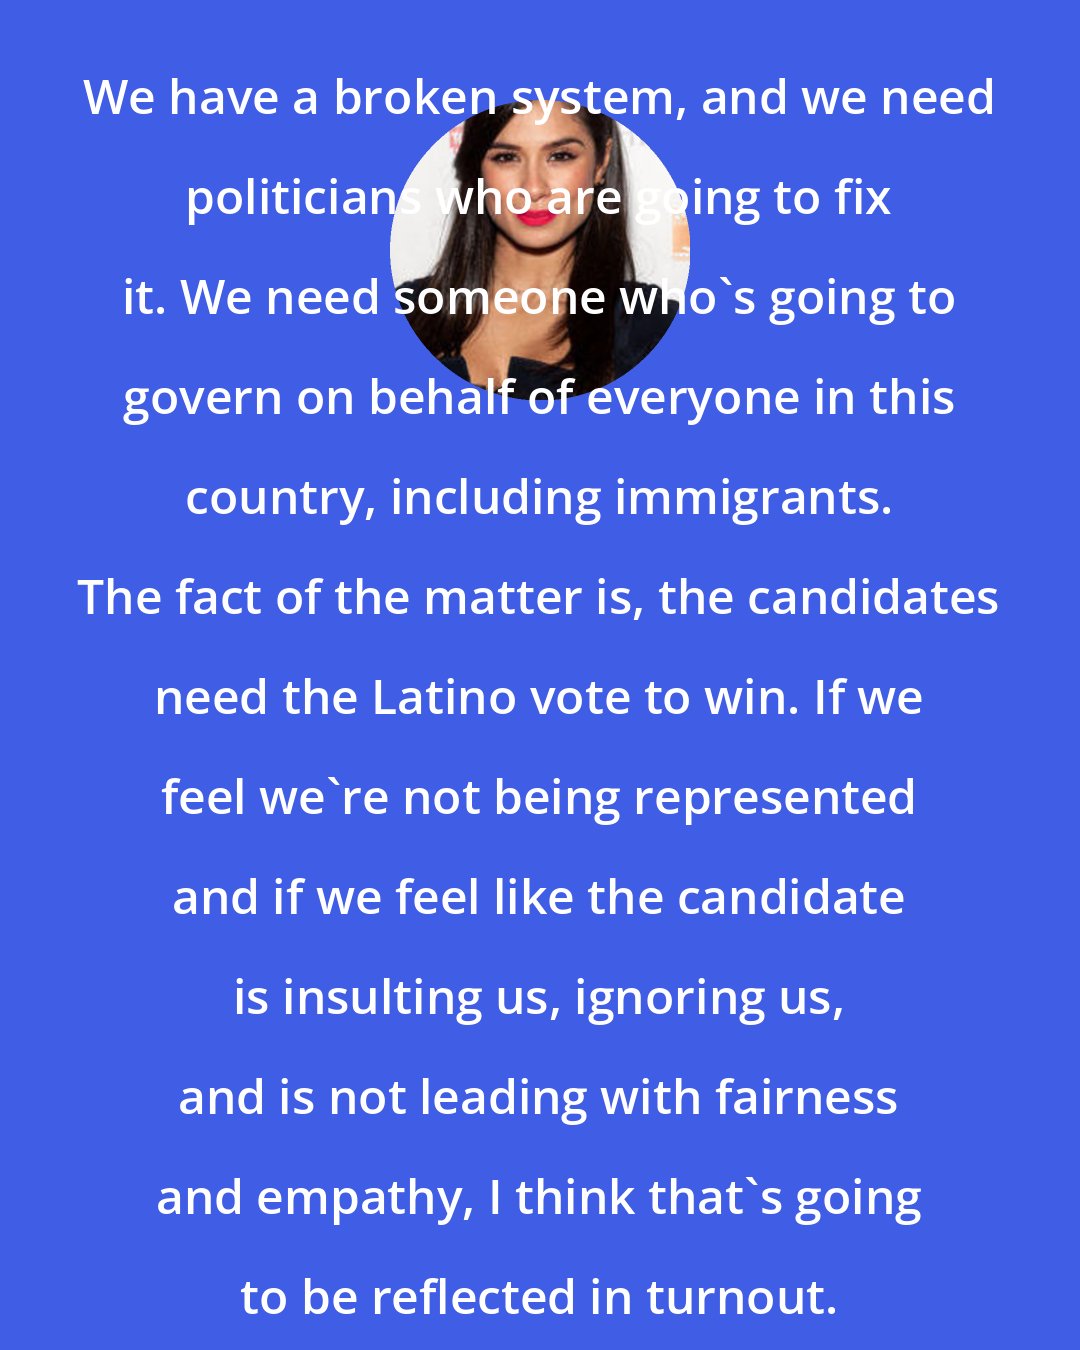 Diane Guerrero: We have a broken system, and we need politicians who are going to fix it. We need someone who's going to govern on behalf of everyone in this country, including immigrants. The fact of the matter is, the candidates need the Latino vote to win. If we feel we're not being represented and if we feel like the candidate is insulting us, ignoring us, and is not leading with fairness and empathy, I think that's going to be reflected in turnout.